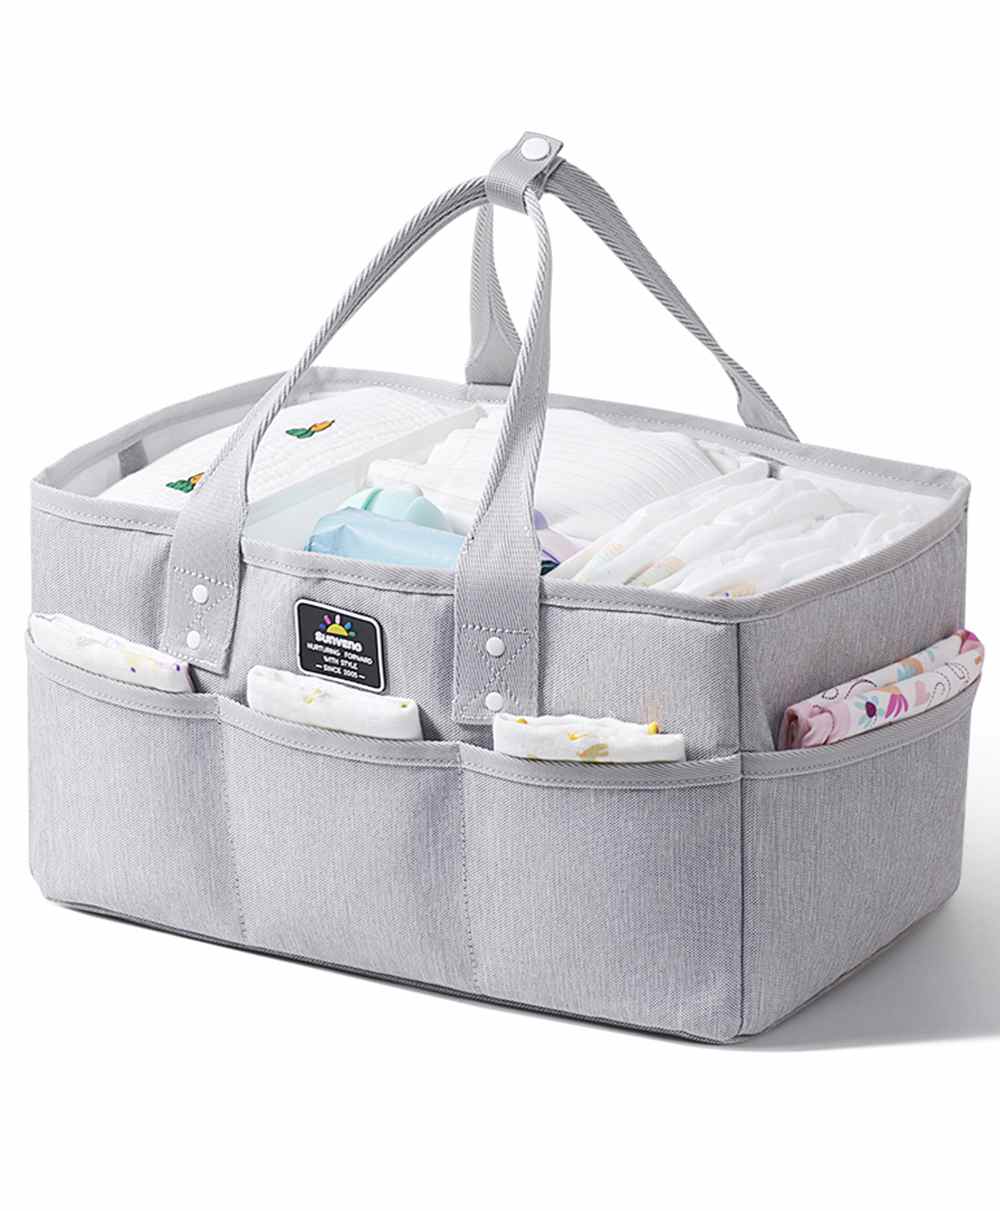 Convenient & Durable Diaper Storage Nursery Basket for Changing Table Organize & Carry Infant Diapers Baby Diaper Changing Organizer Caddy Toys Snacks Perfect Baby Shower Gift Clothes Store 